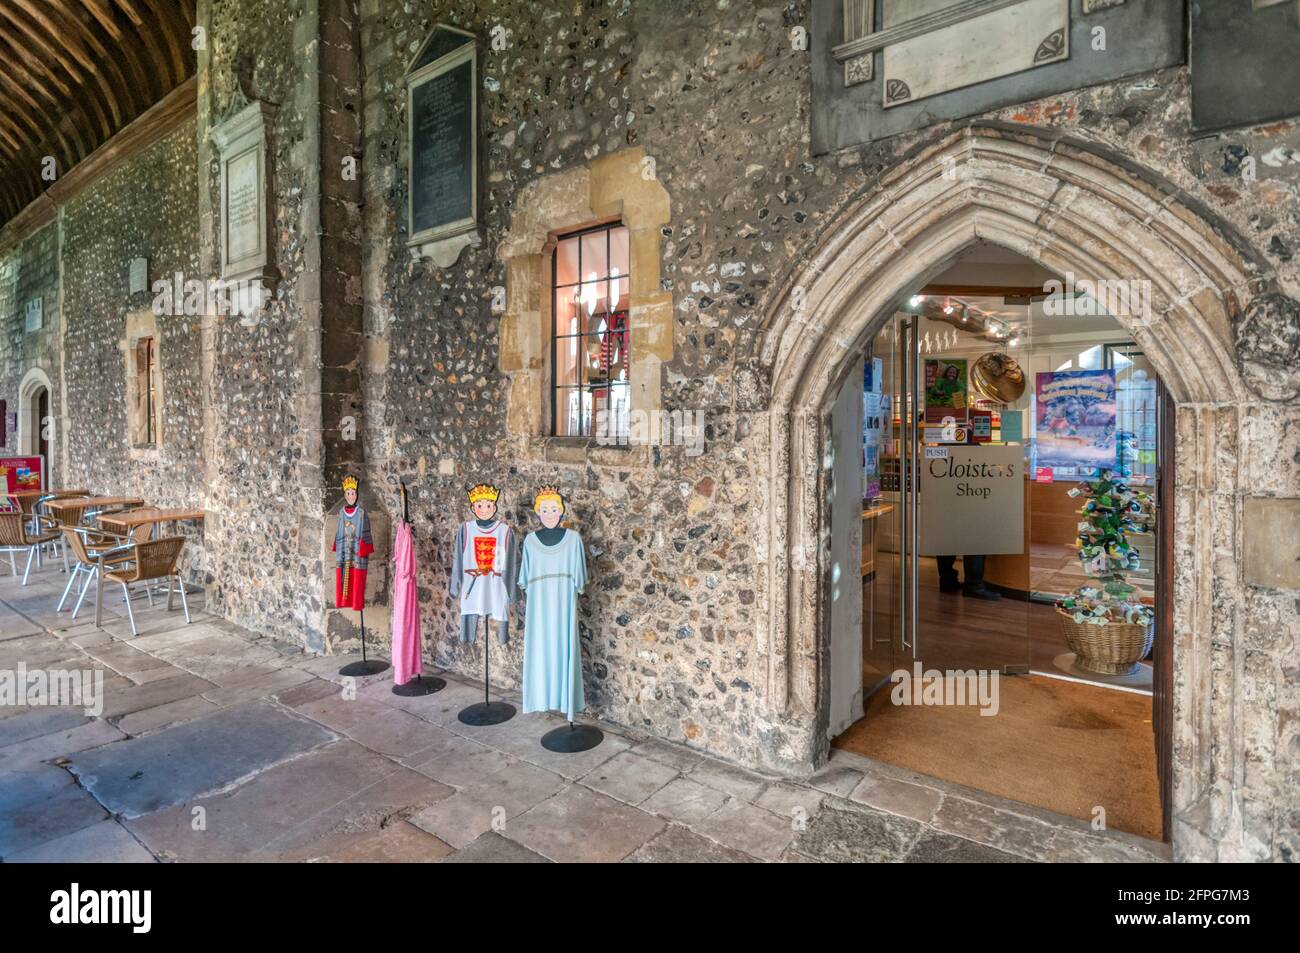 The Cloisters Shop in Chichester Cathedral Cloisters. Stockfoto